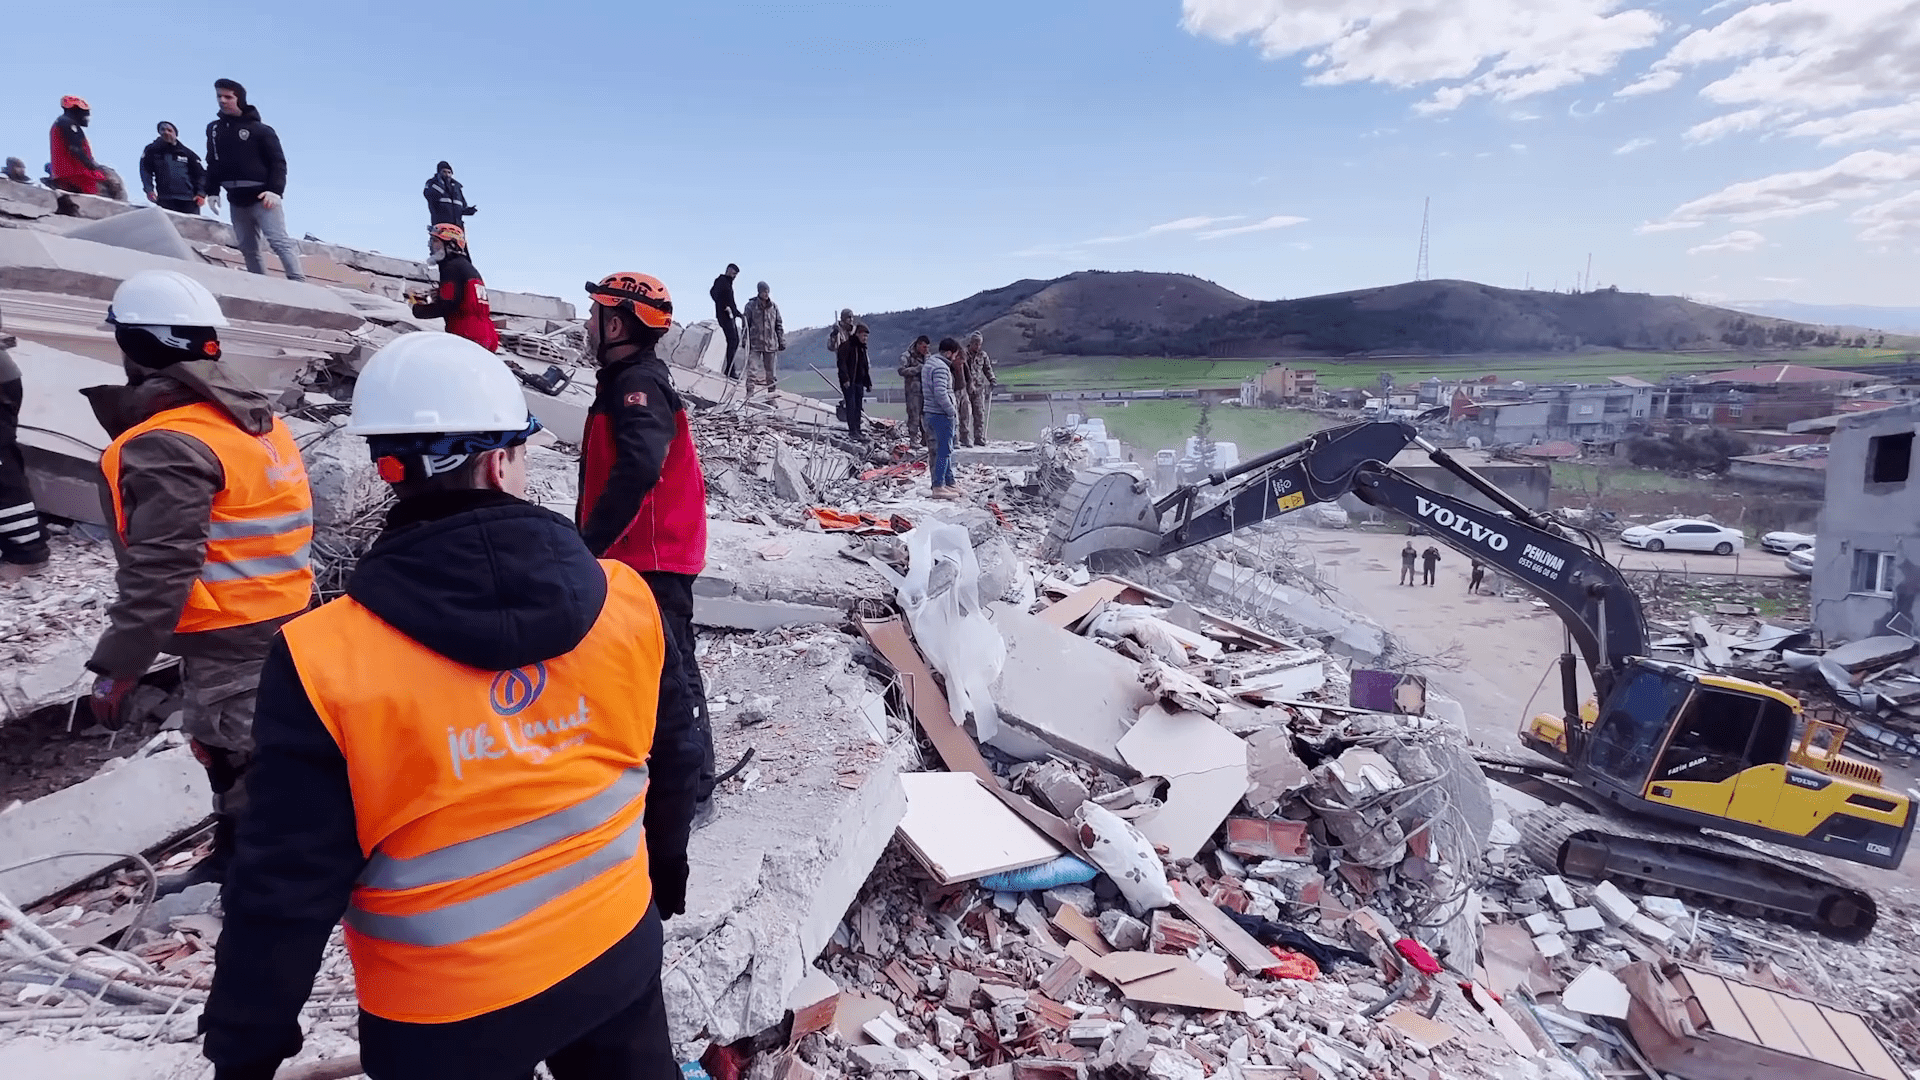 Samaritan's Purse is urging prayer for all those who are in anguish after the earthquakes in Turkey and for the work of their teams.